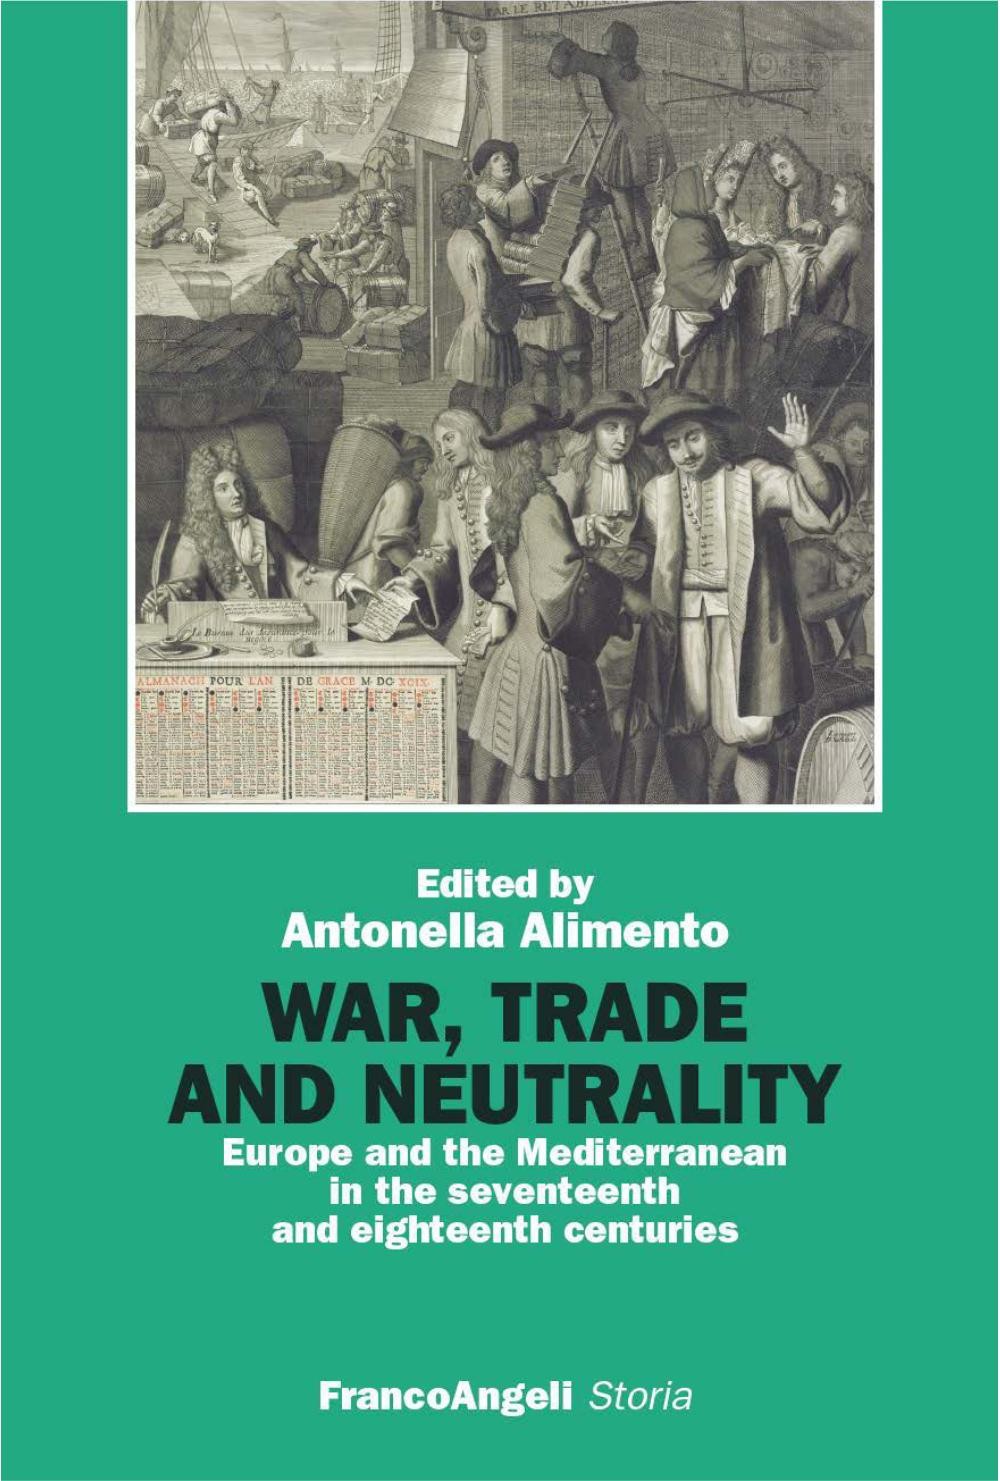 War, Trade and Neutrality. Europe and the Mediterranean in seventeenth and eighteenth centuries - Librerie.coop